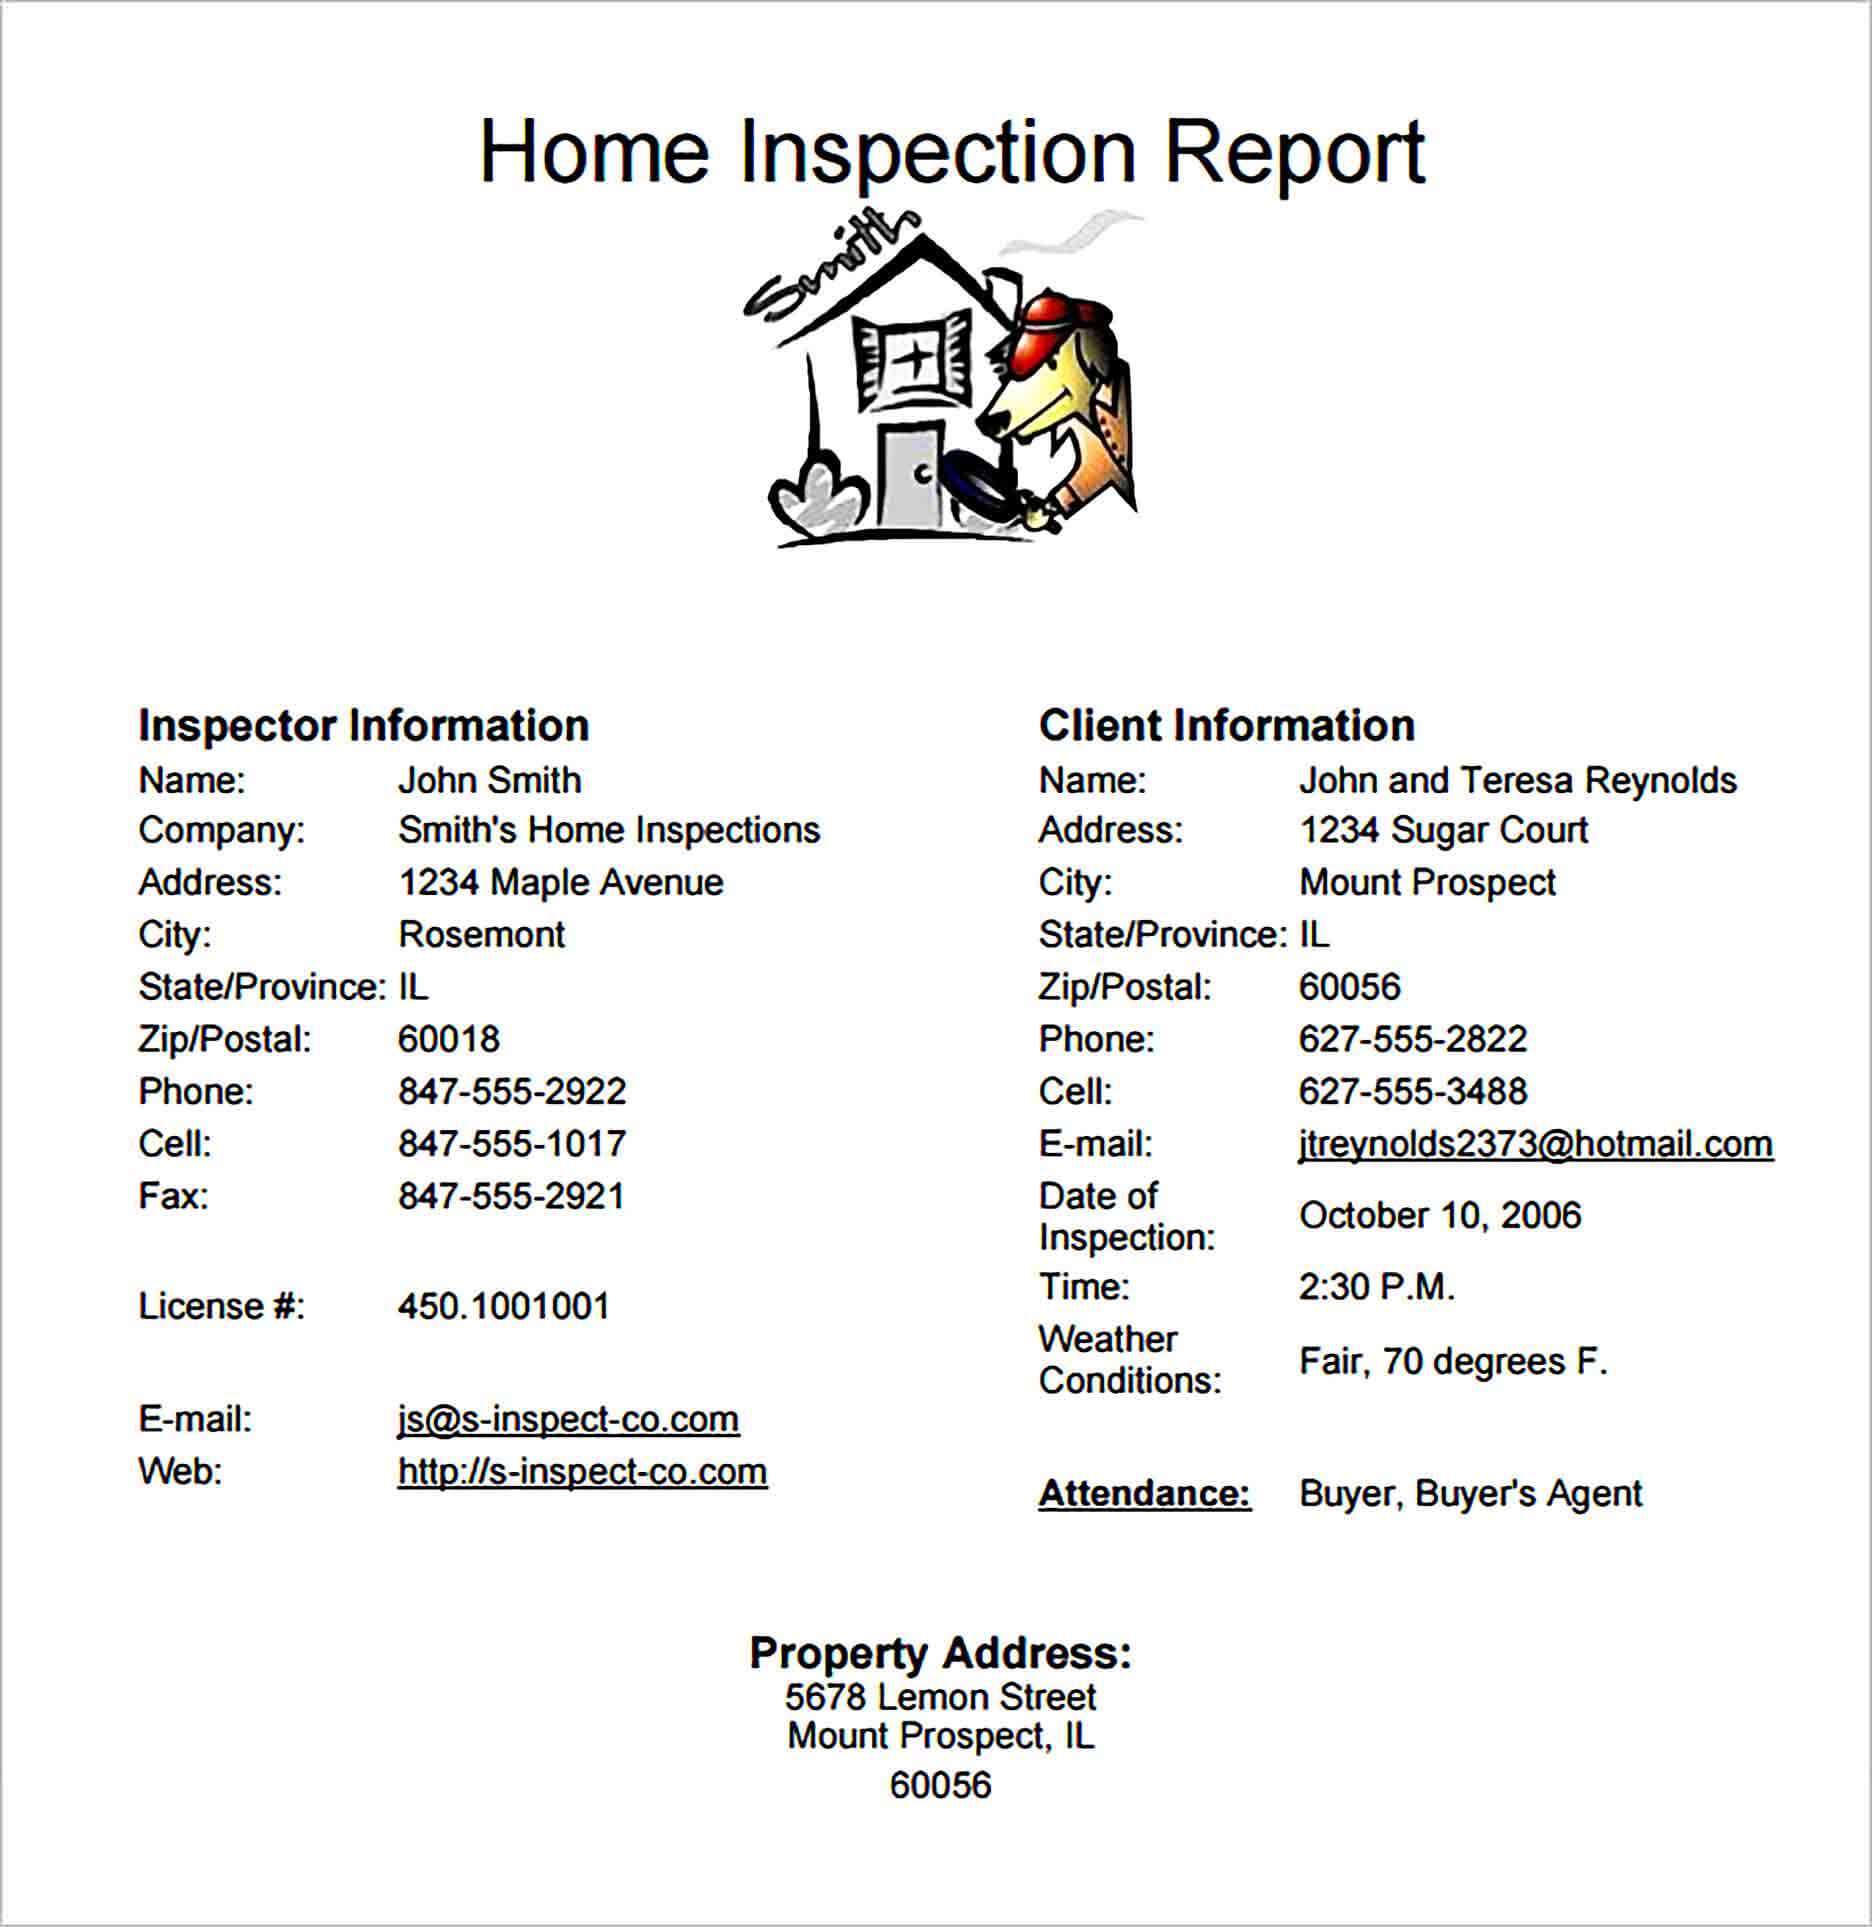 Sample Home Inspection Report Template 1 1